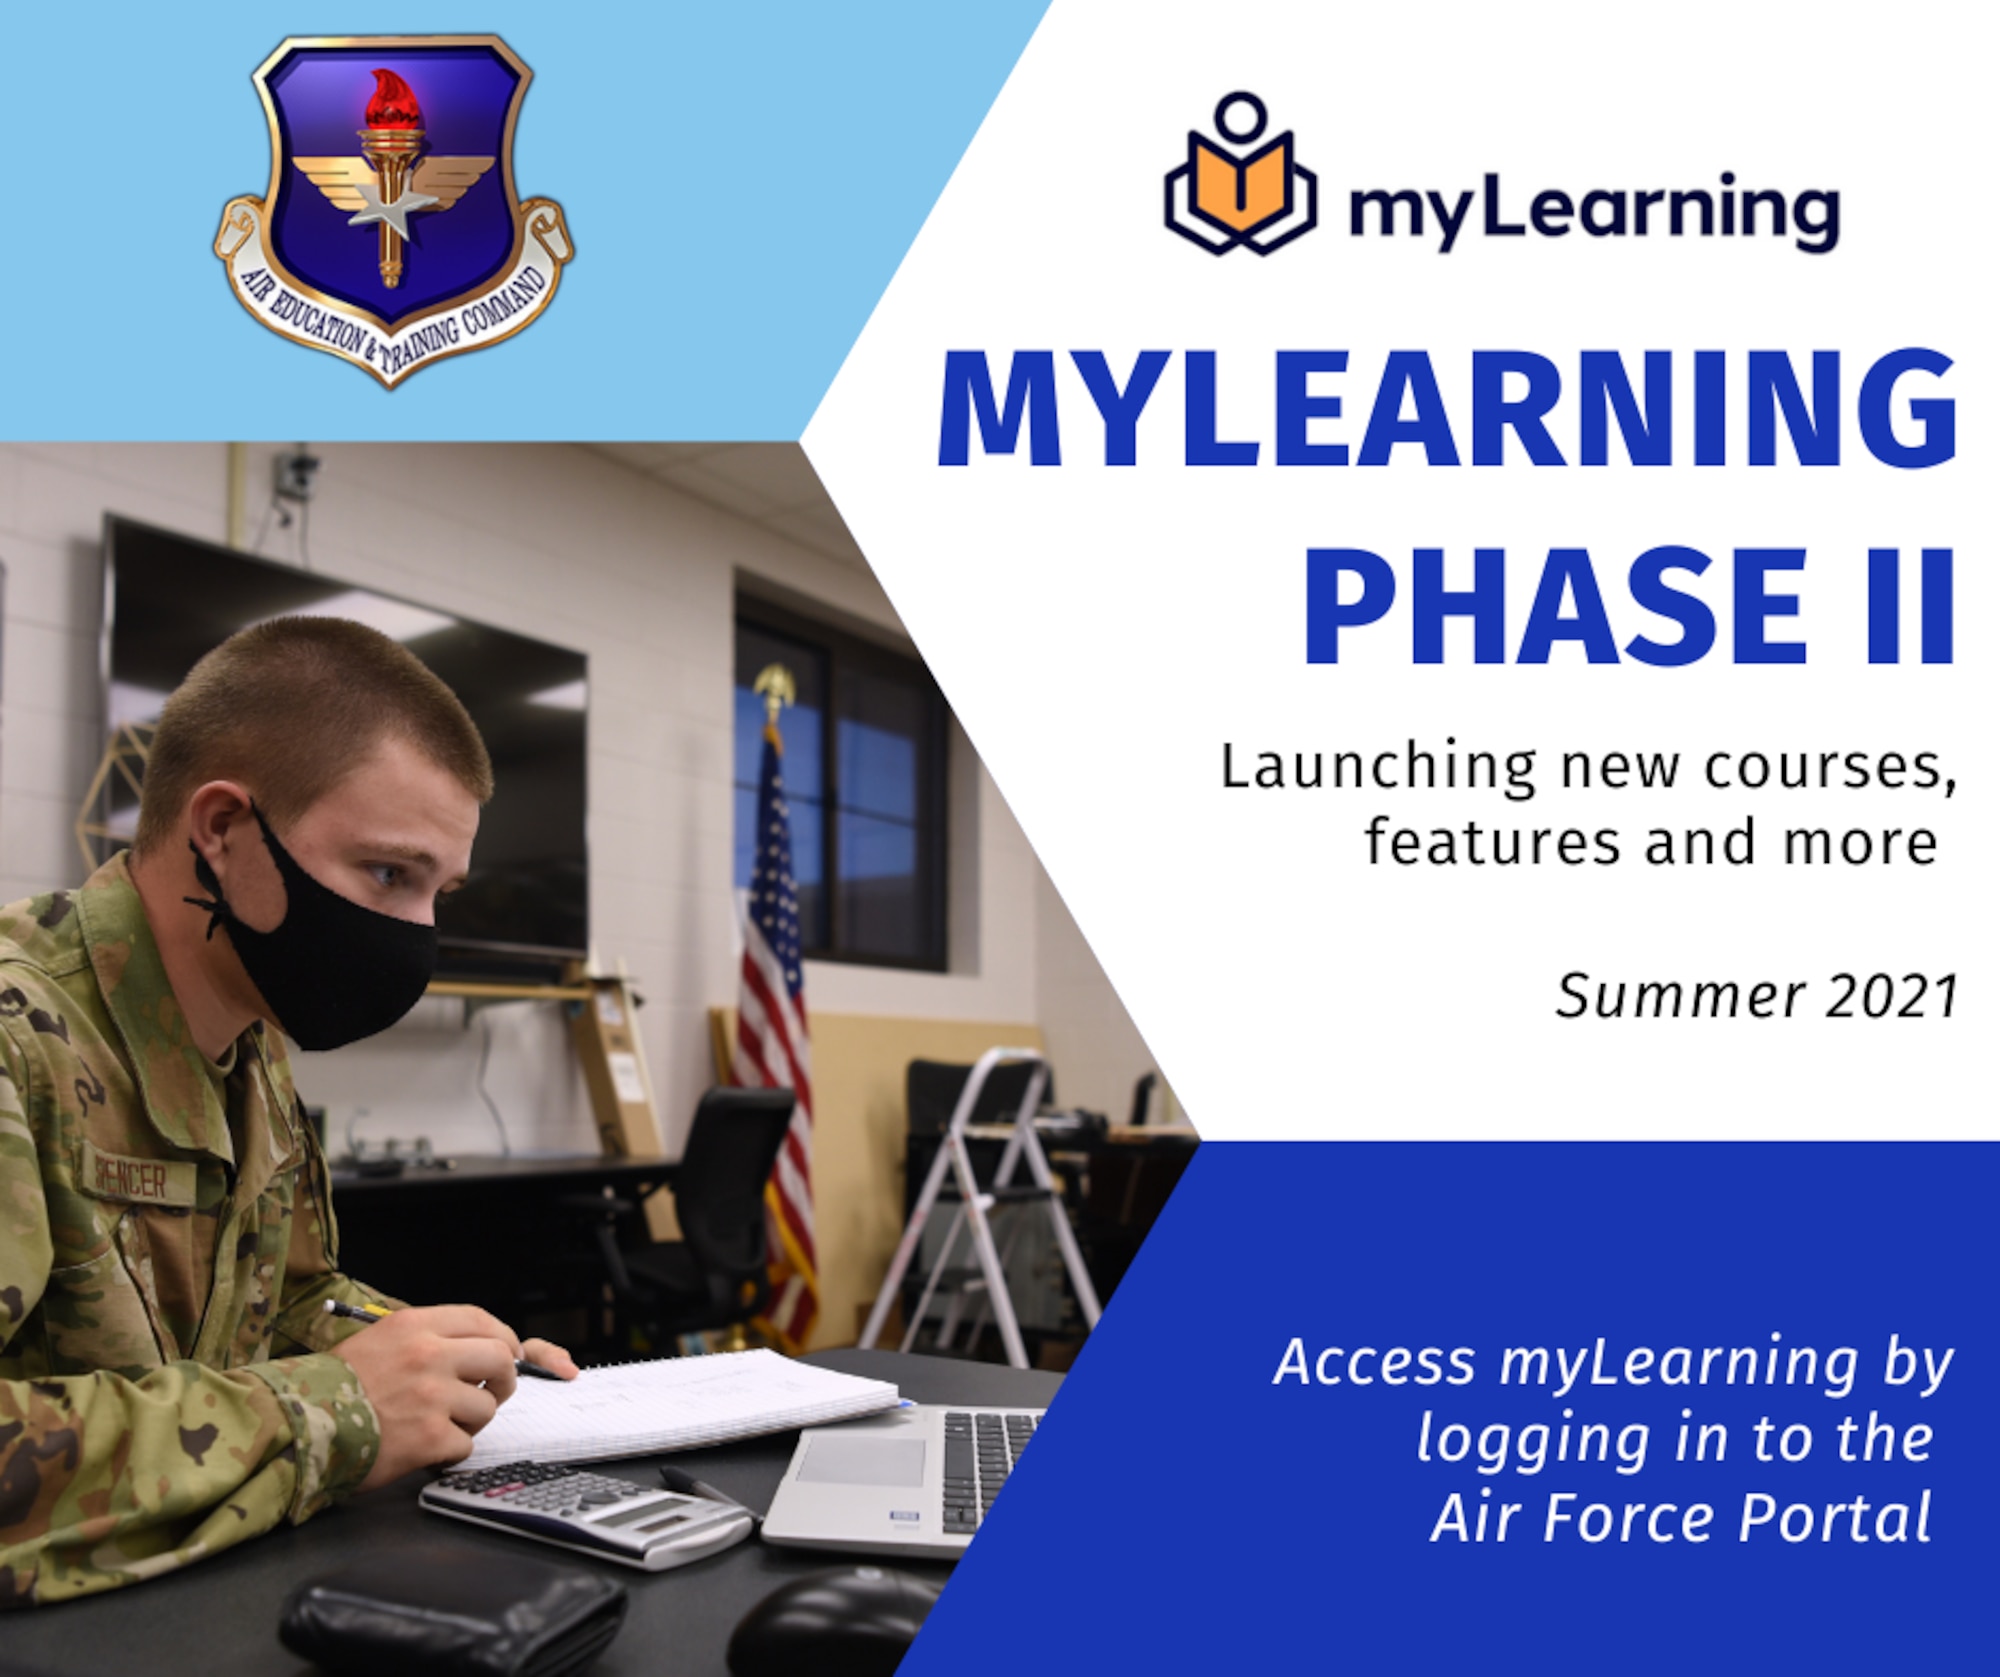 Air Education and Training Command’s “myLearning” system is entering phase two of its rollout, adding new features scheduled to be available to Airmen and Guardians early this summer. The Air Force’s 21st Century learning system is part of the service’s focus on deliberate development of the Total Force.